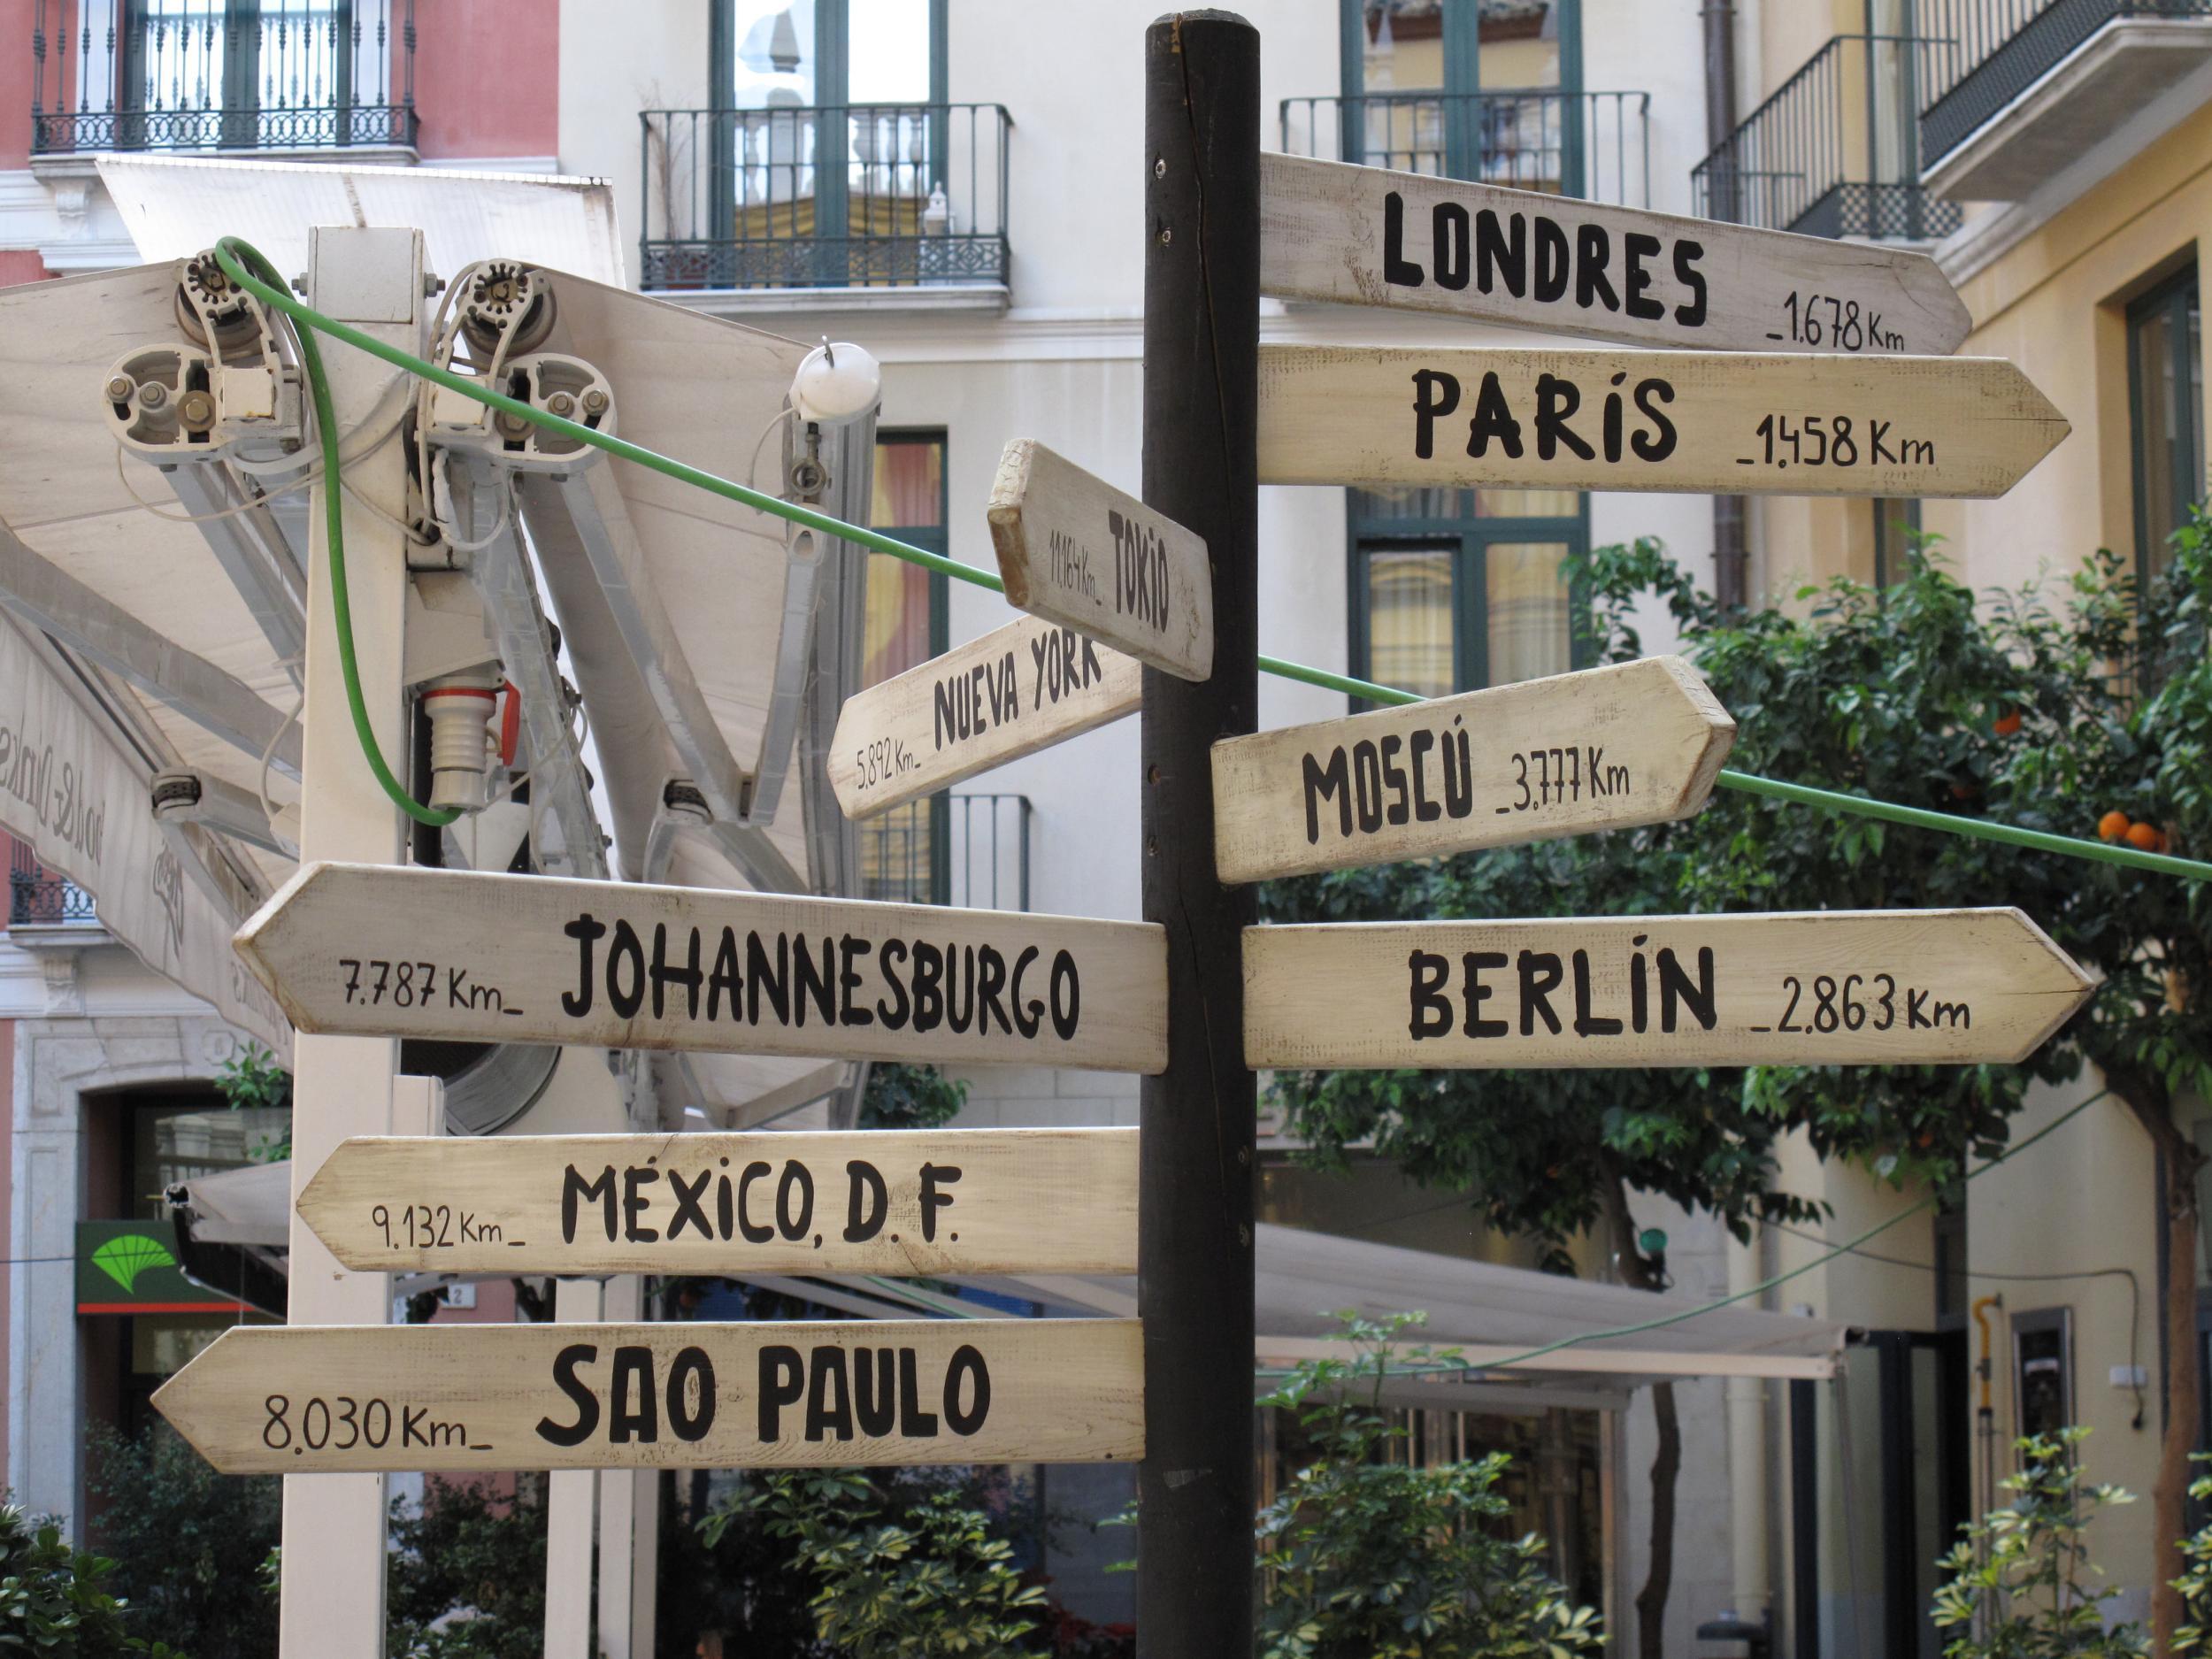 Going places: Signpost in a square in Malaga, southern Spain